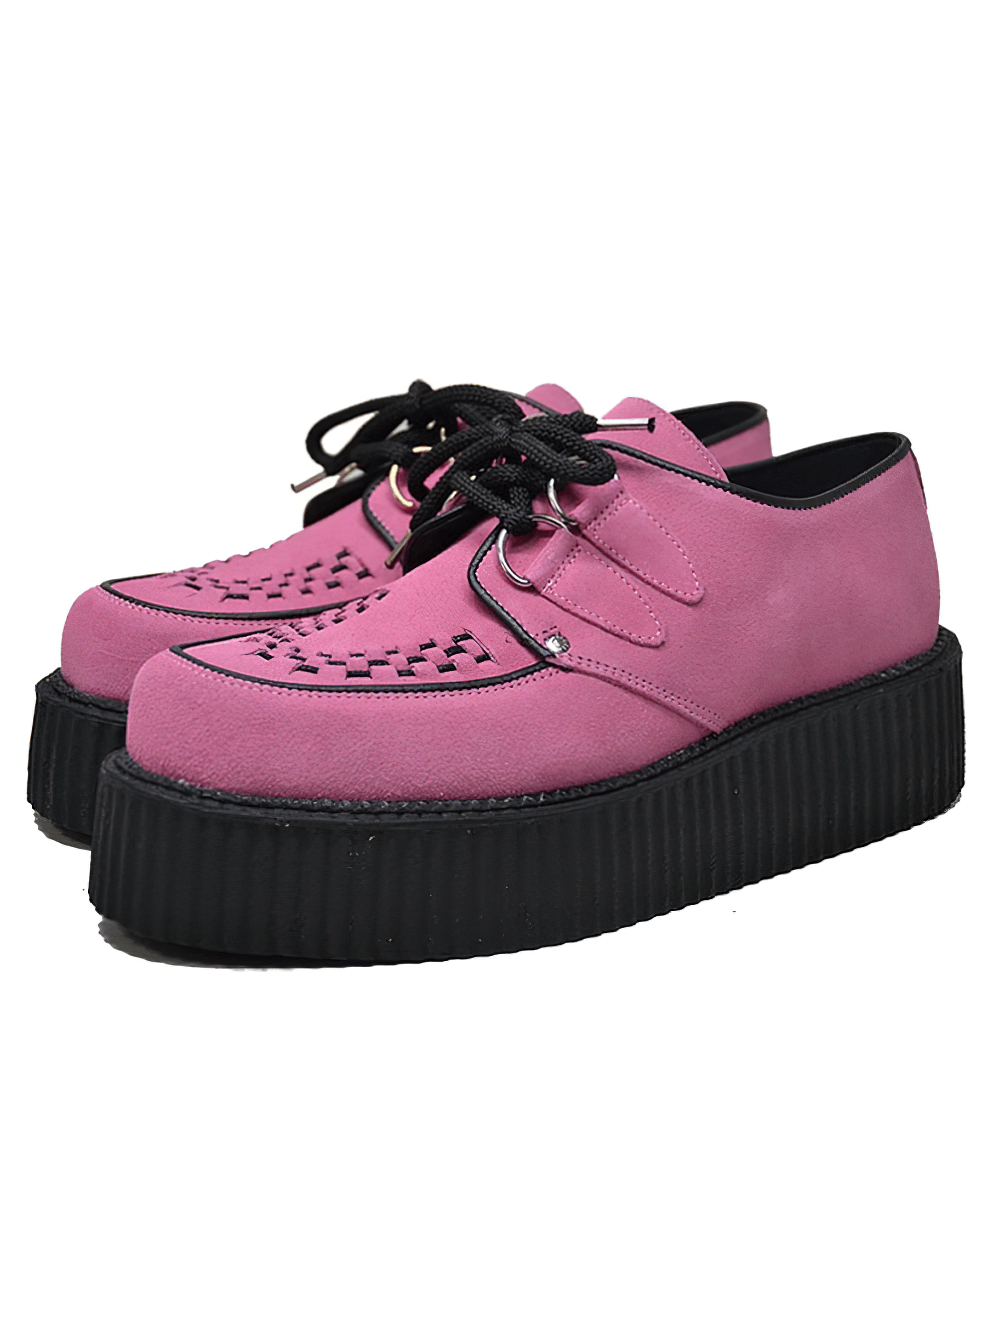 Pink Suede Unisex Creepers with Double Rubber Sole